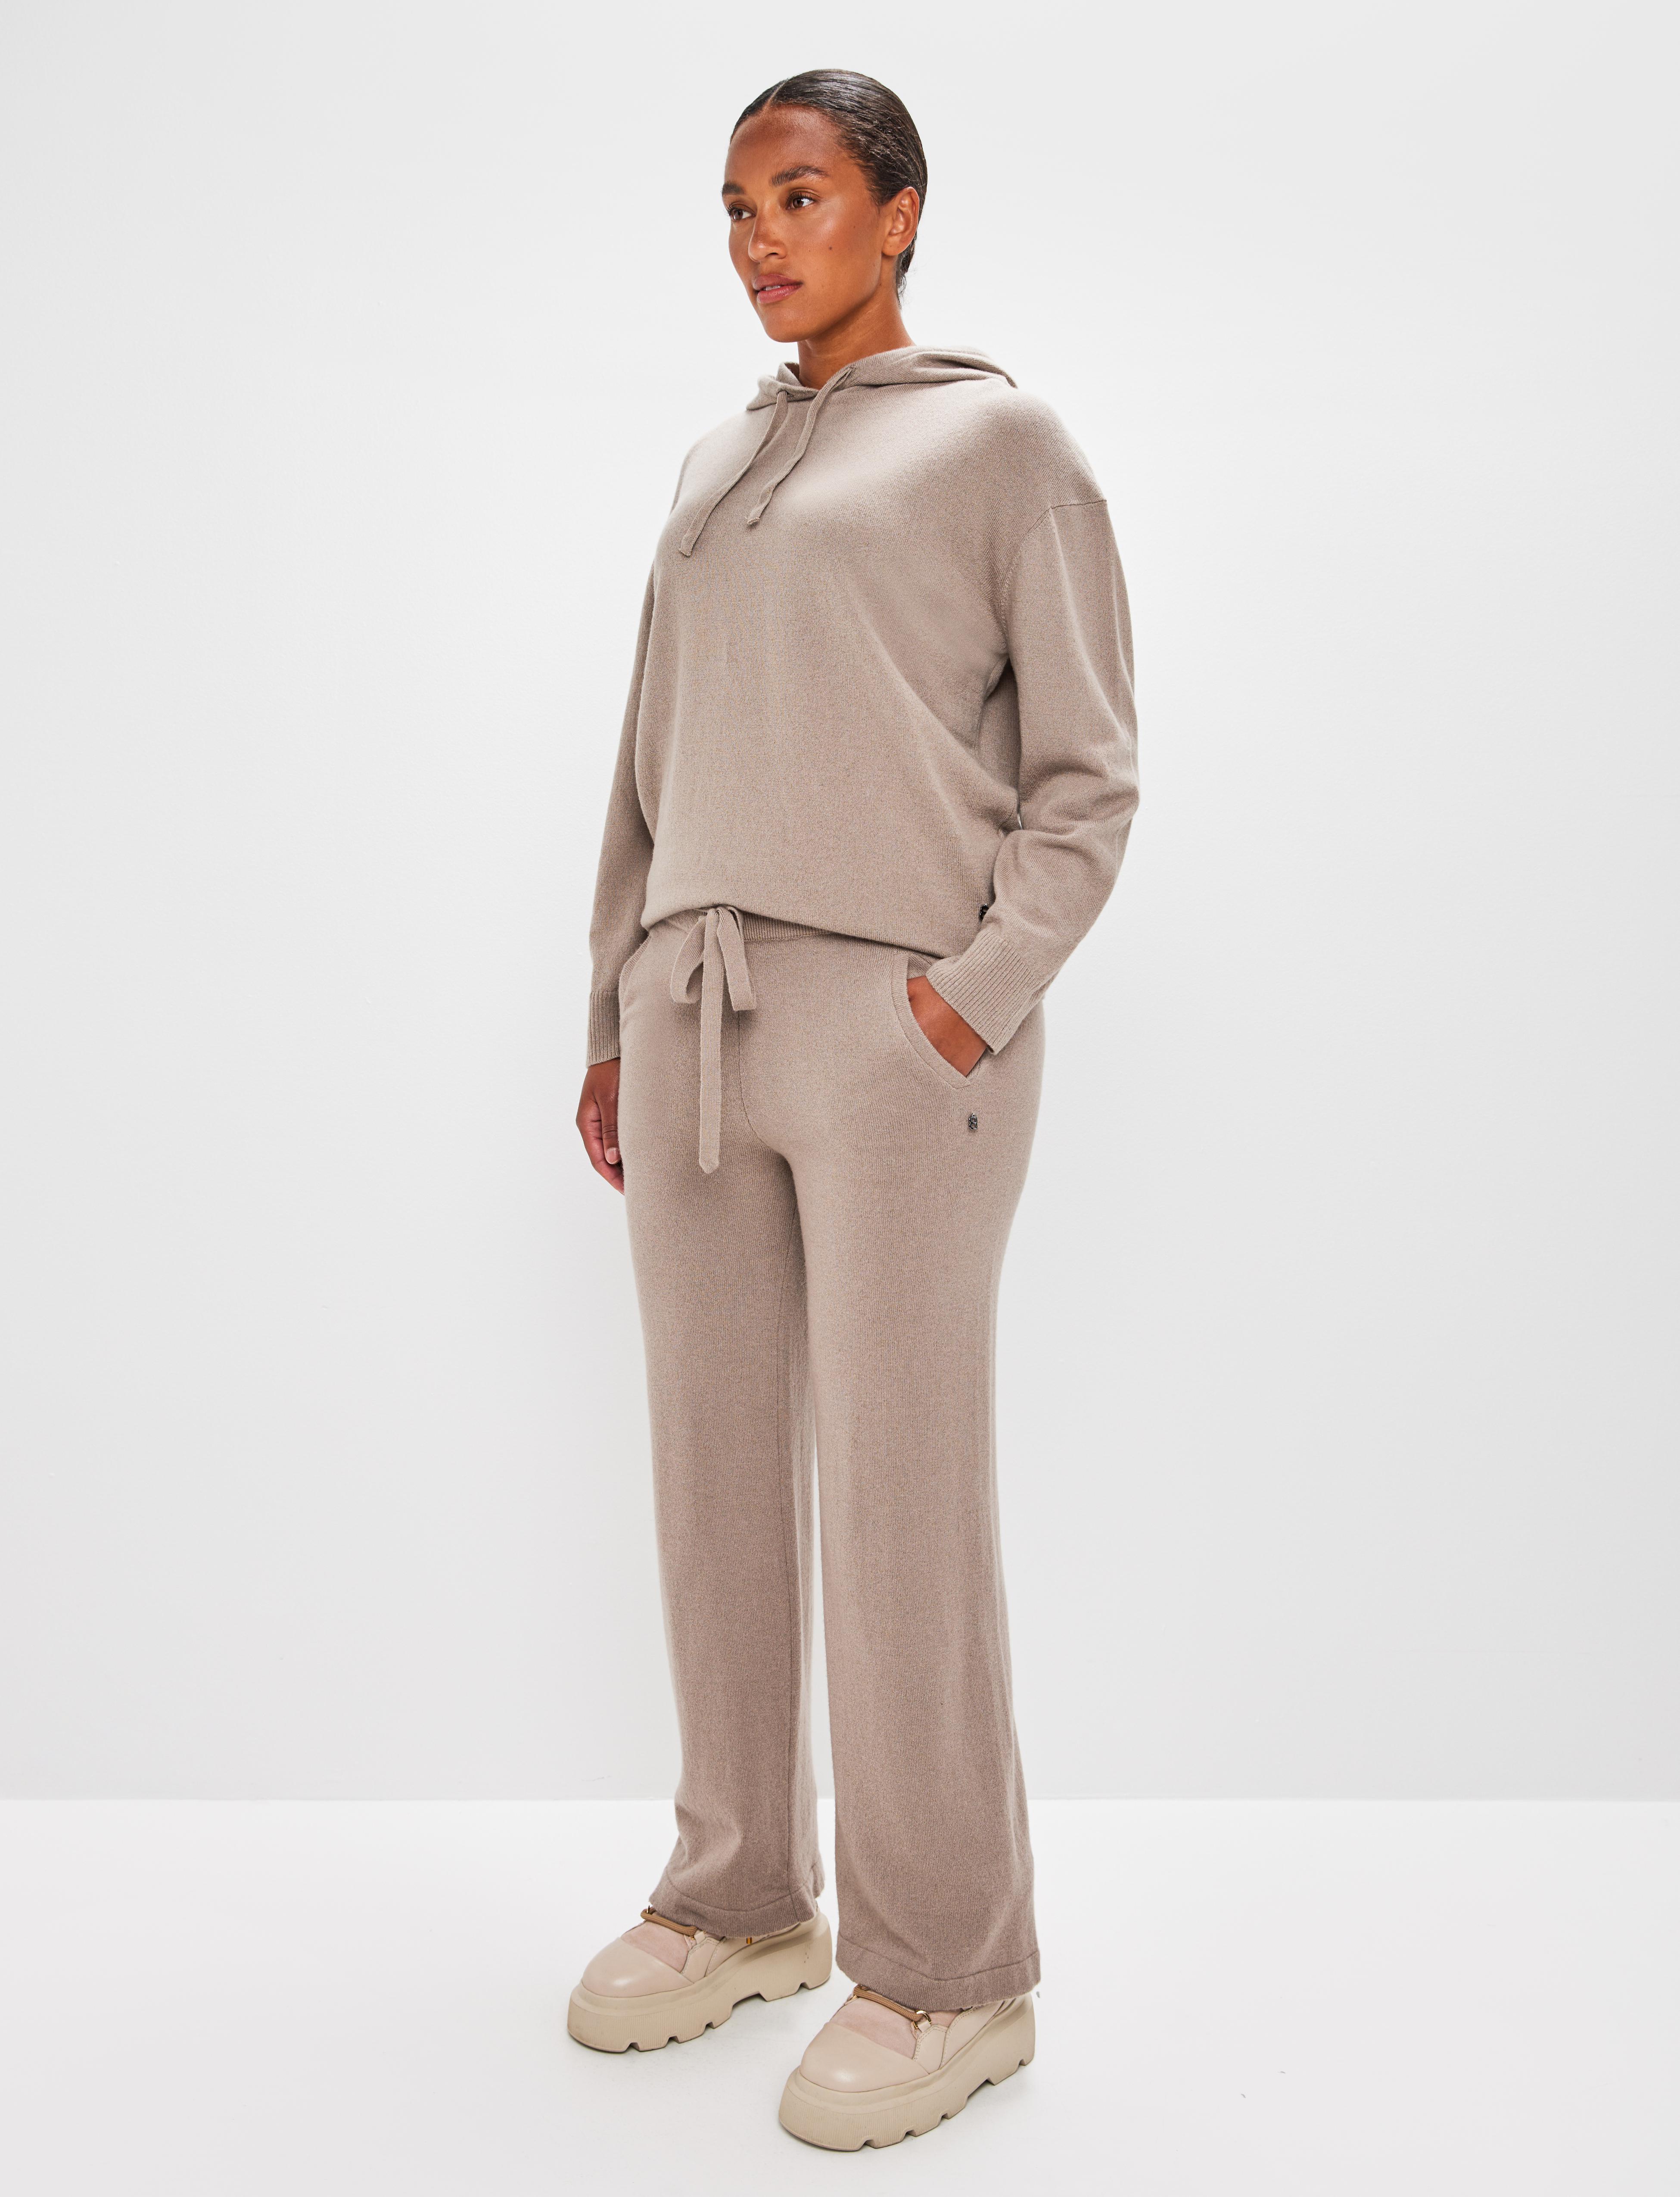 Sutton W Knitted Pant - Beige Sweatpant Dam